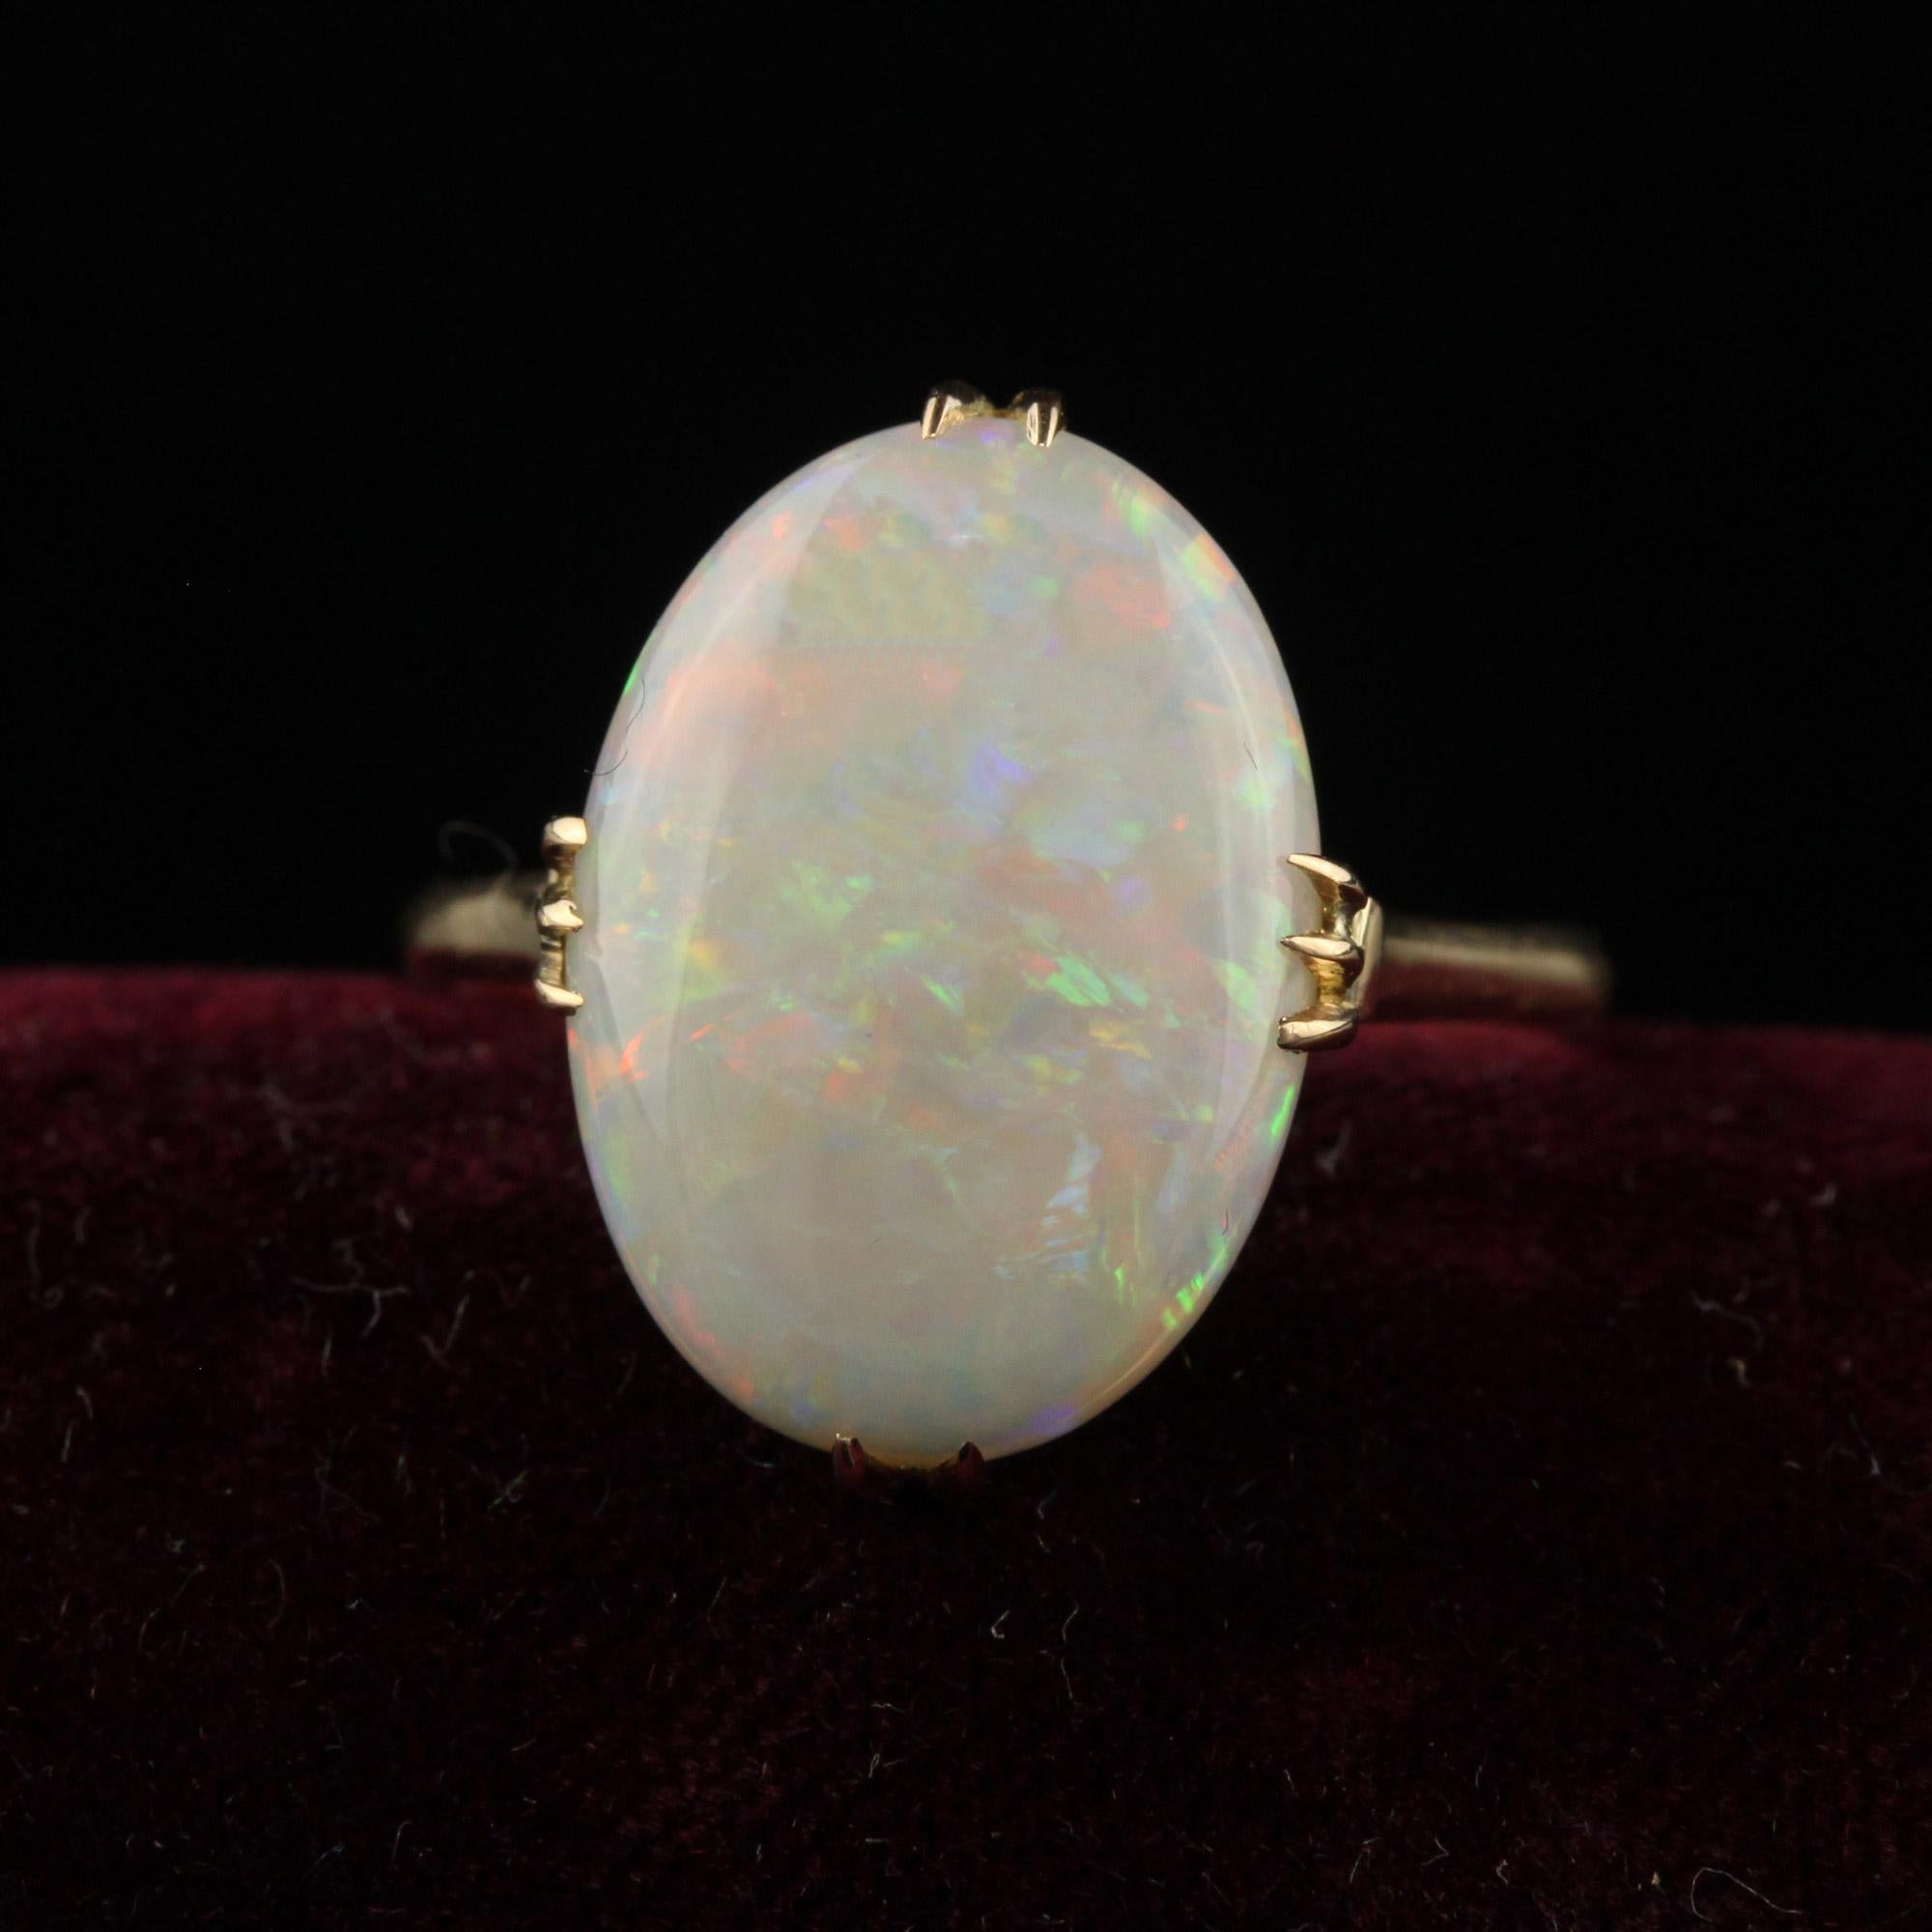 Beautiful Antique Art Deco 18K Yellow Gold Natural Cabochon Opal Filigree Ring. This gorgeous antique art deco opal ring is crafted in 18k yellow gold. The center holds a gorgeous natural opal with a beautiful play of colors. The mounting has